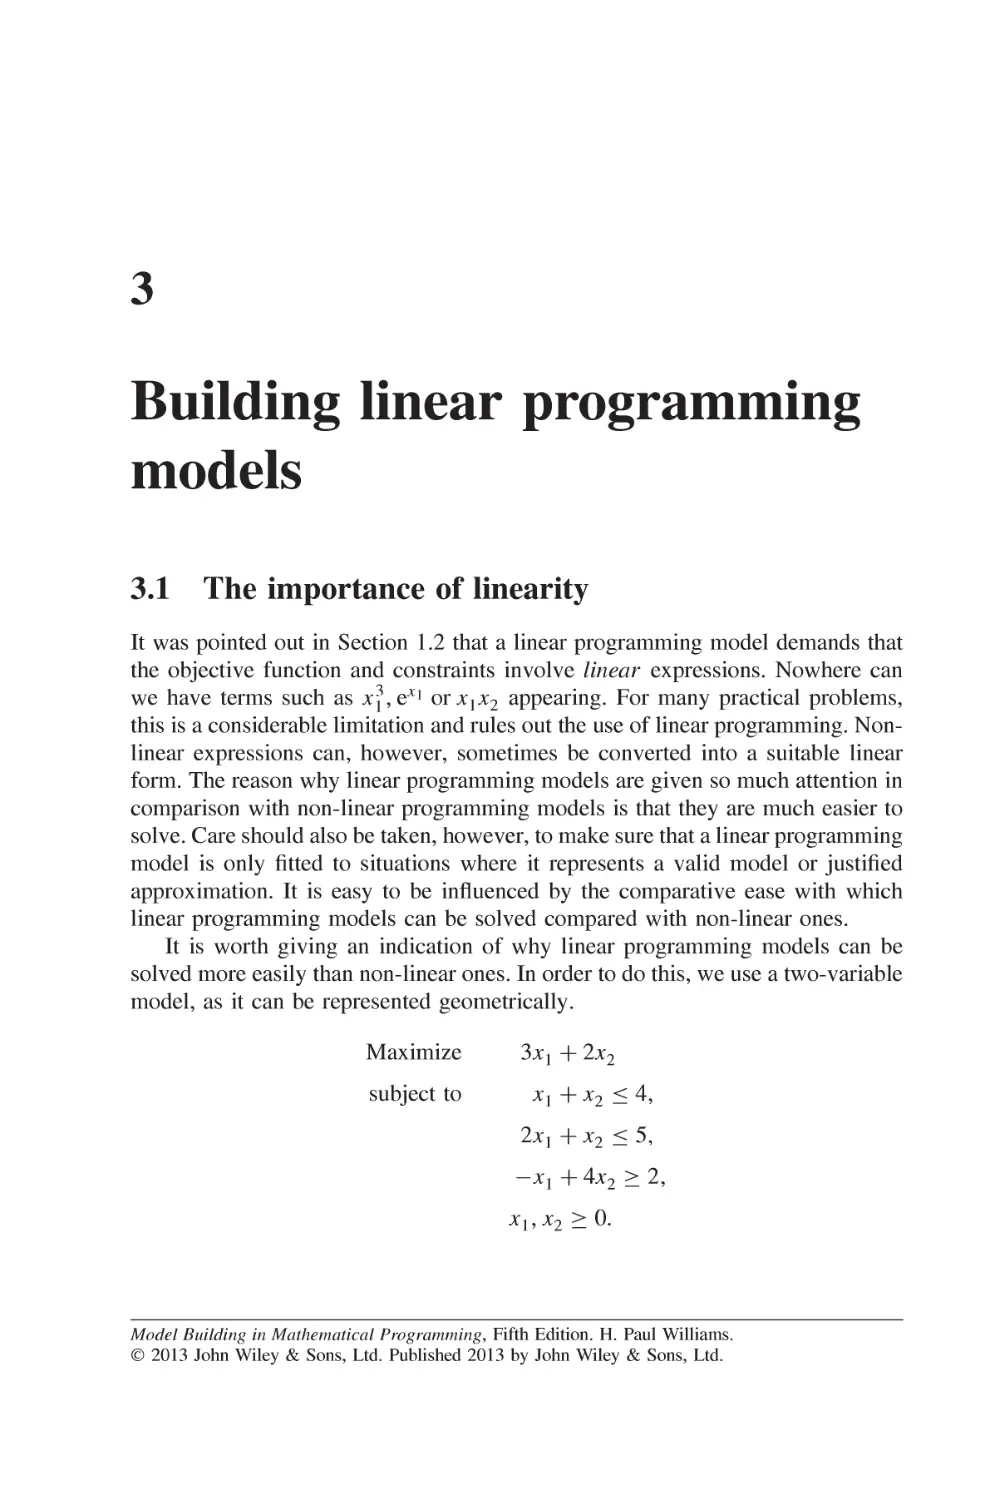 Chapter 3 Building linear programming models